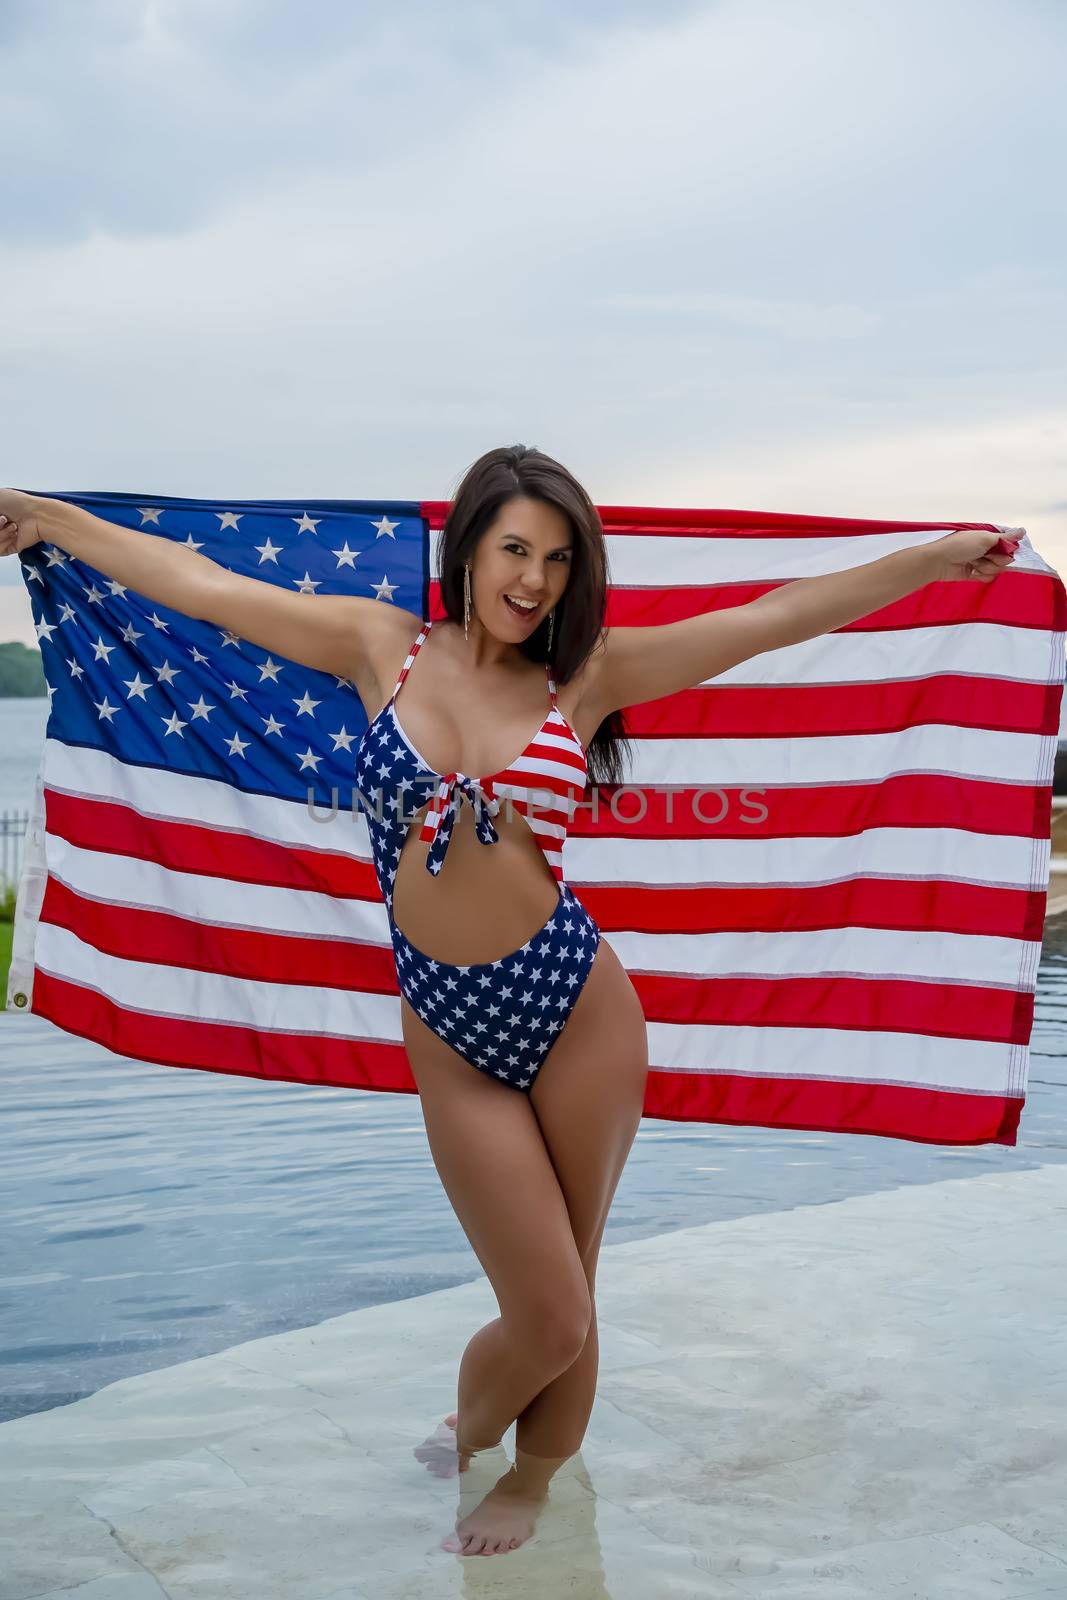 Portrait of a woman wearing a patriotic American bikini while holding an American flag